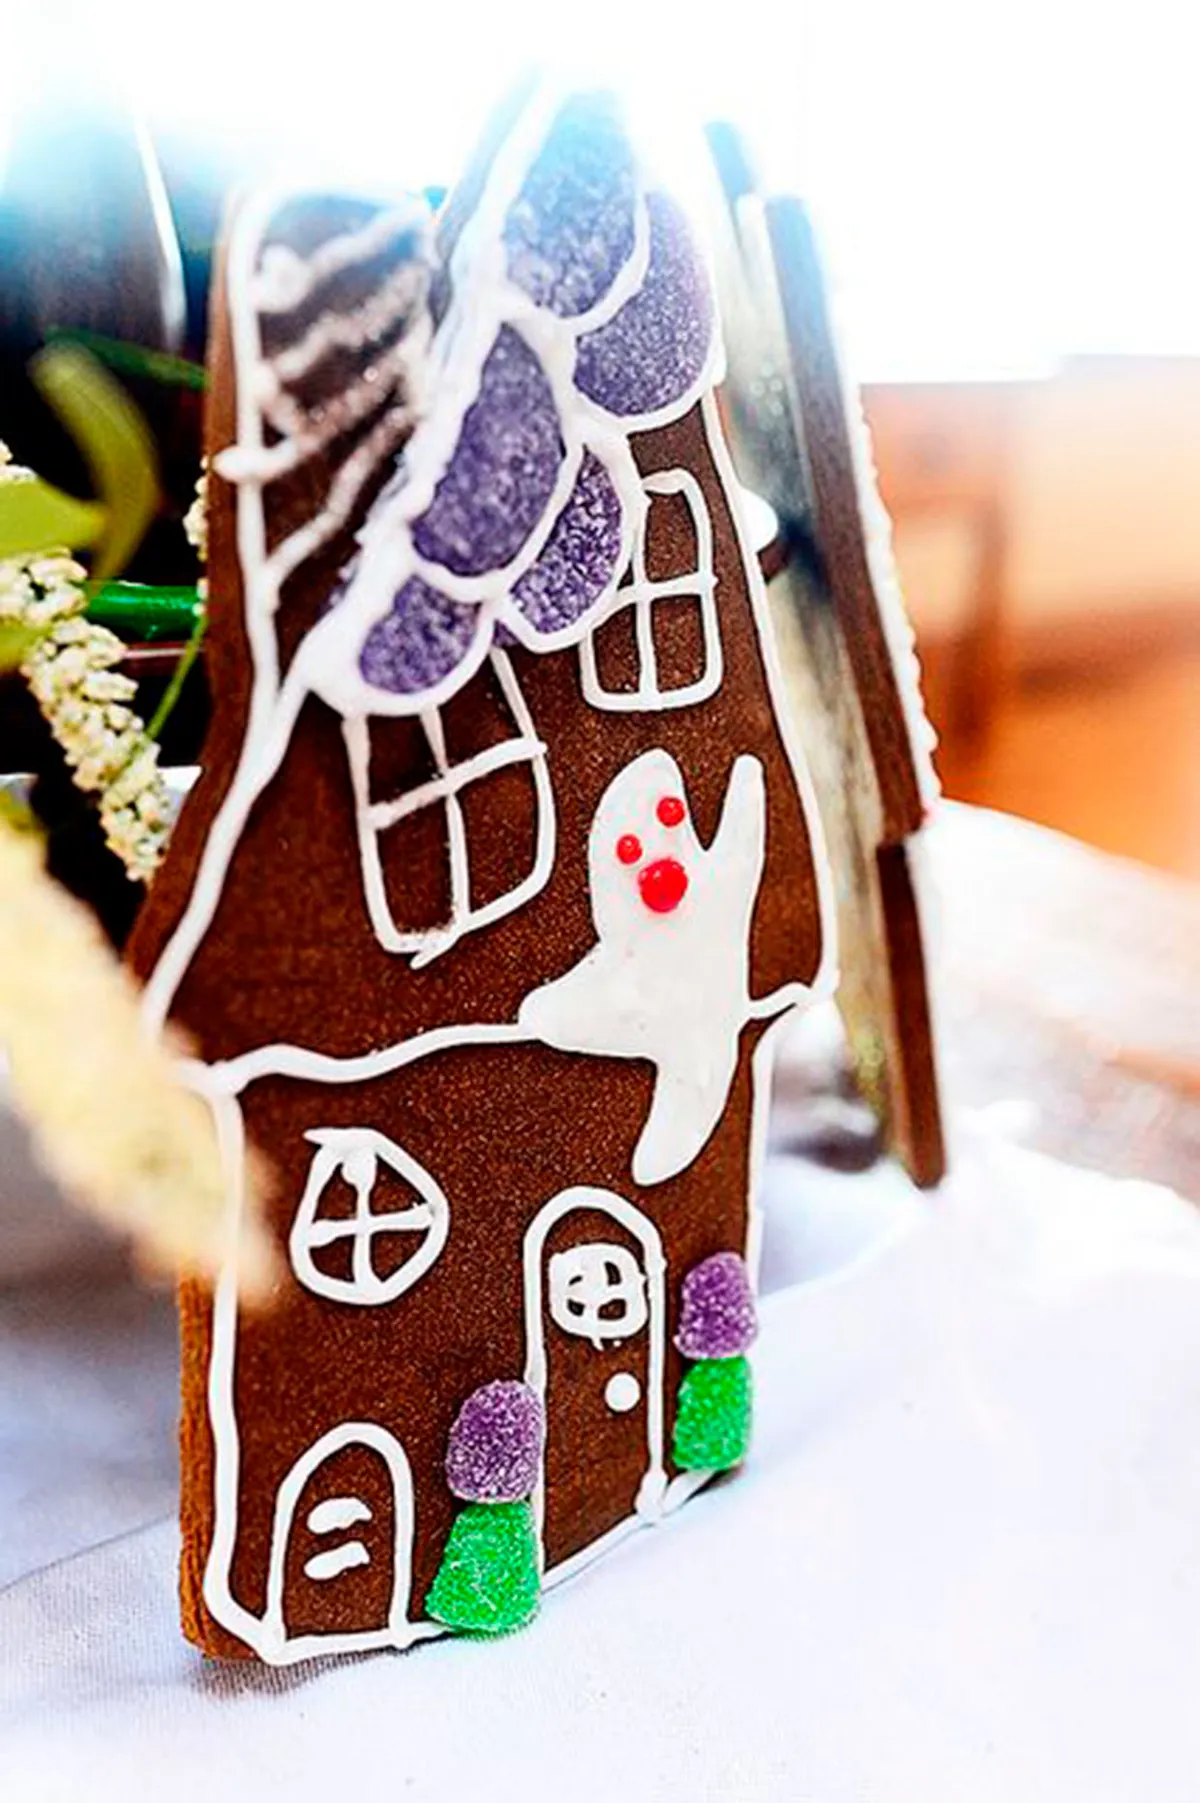 Haunted house gingerbread